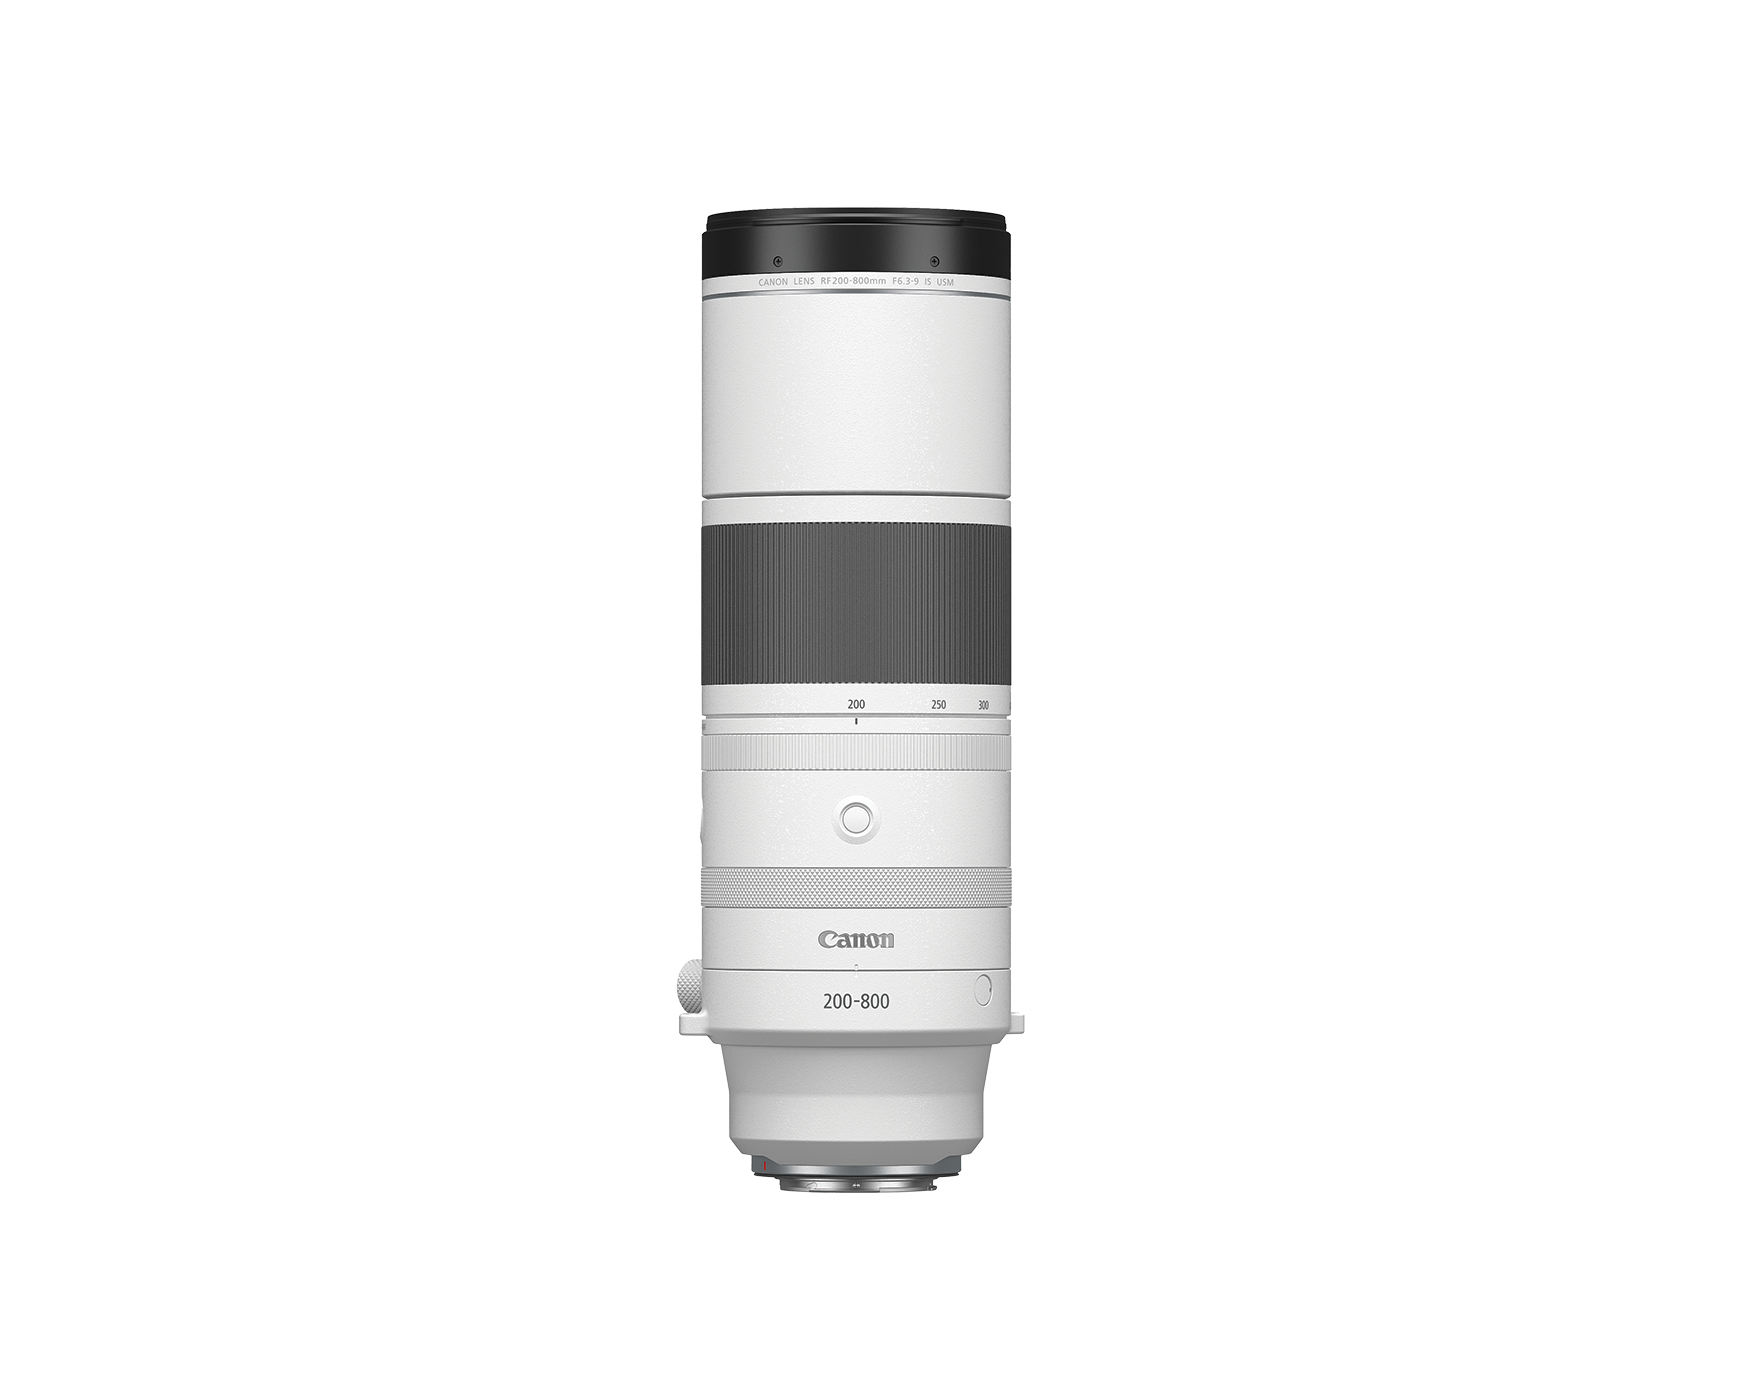 pr rf200 800mm 1 - Canon Introduces Three New Lenses, Enhancing Still Photography and Video Production for Any Skill Level